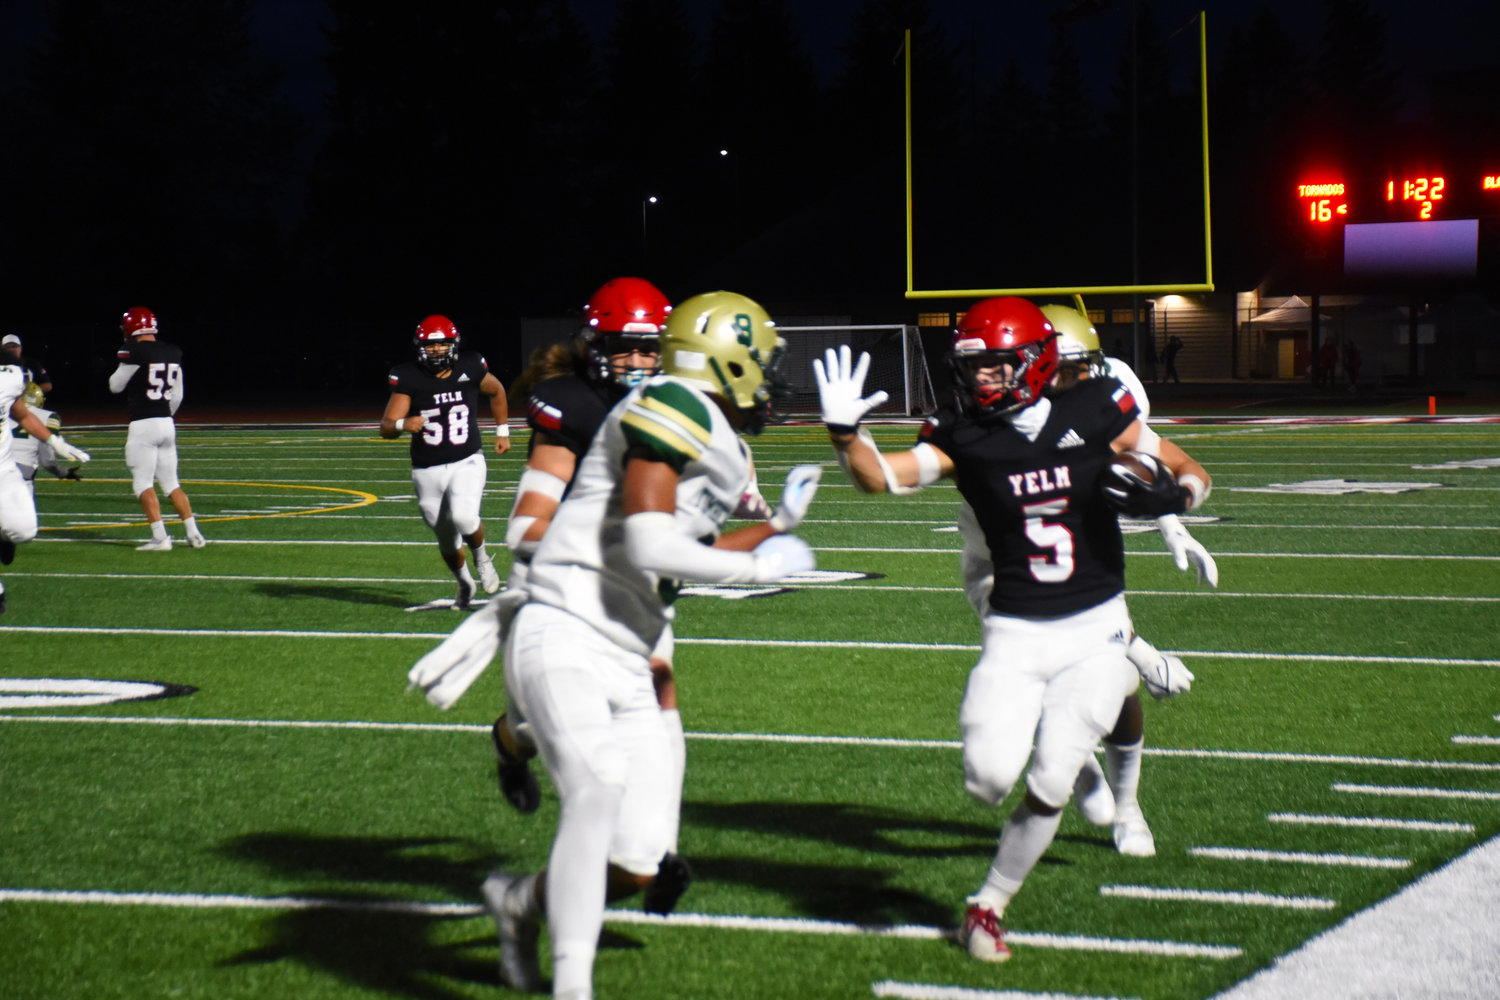 Kyler Ronquillo runs the ball at a game against Timberline High School on Friday, Sept. 17.